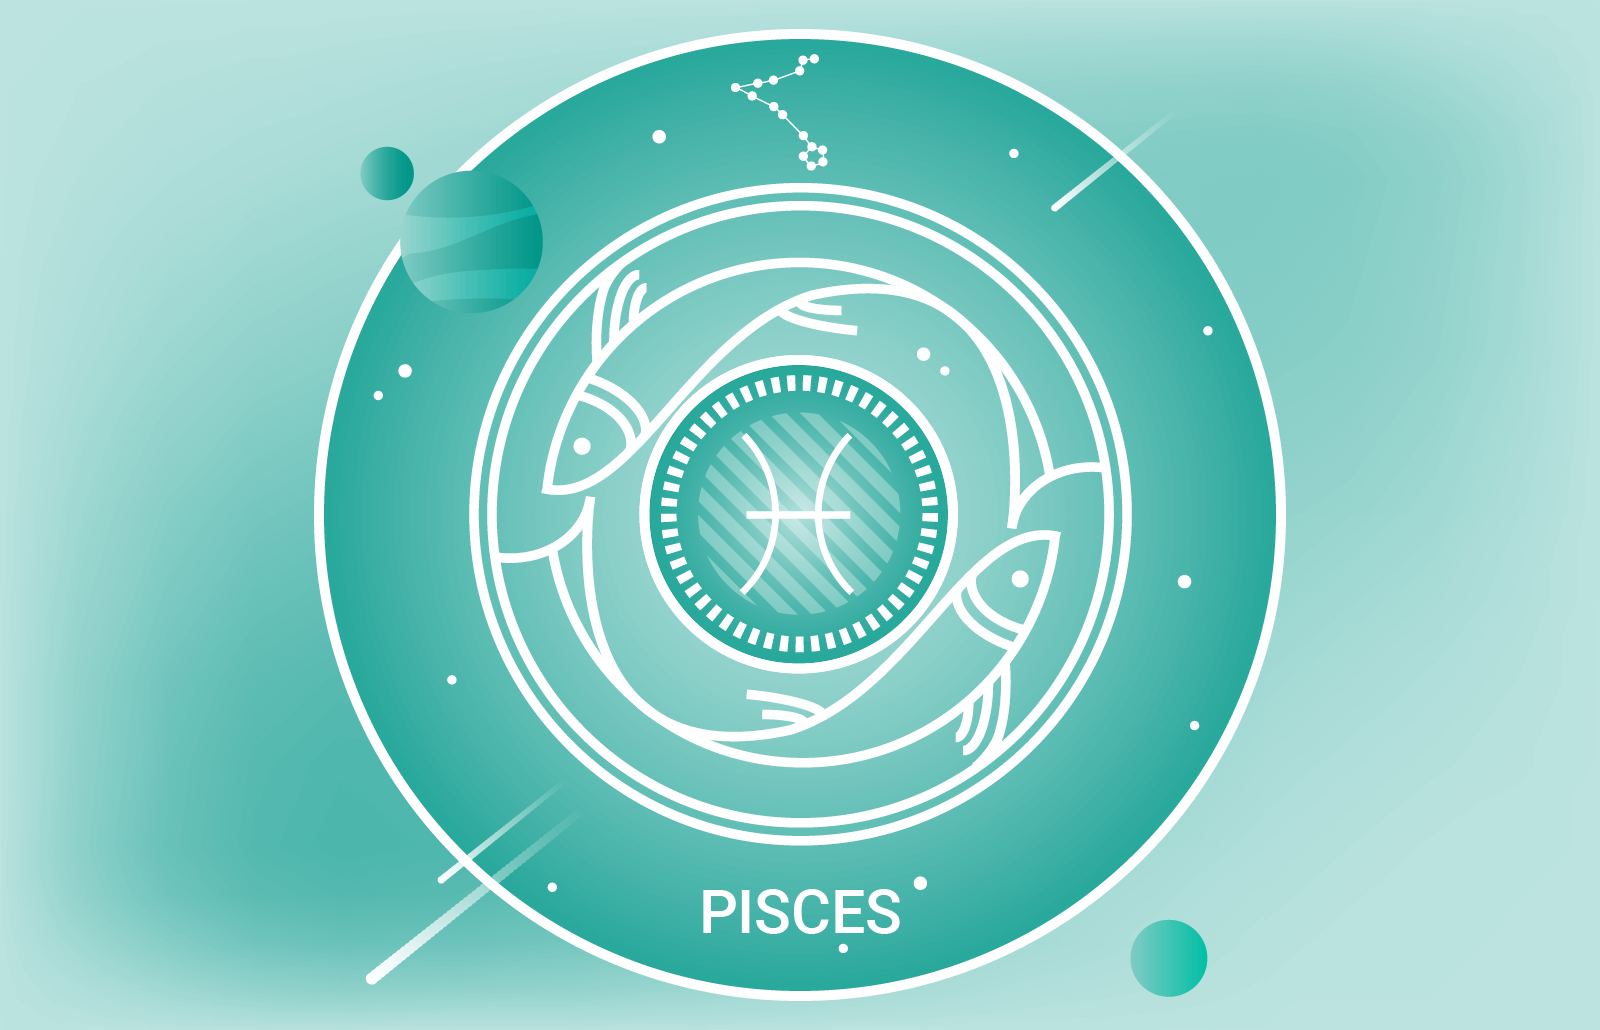 Pisces zodiac sign symbol, constellation, and two fish